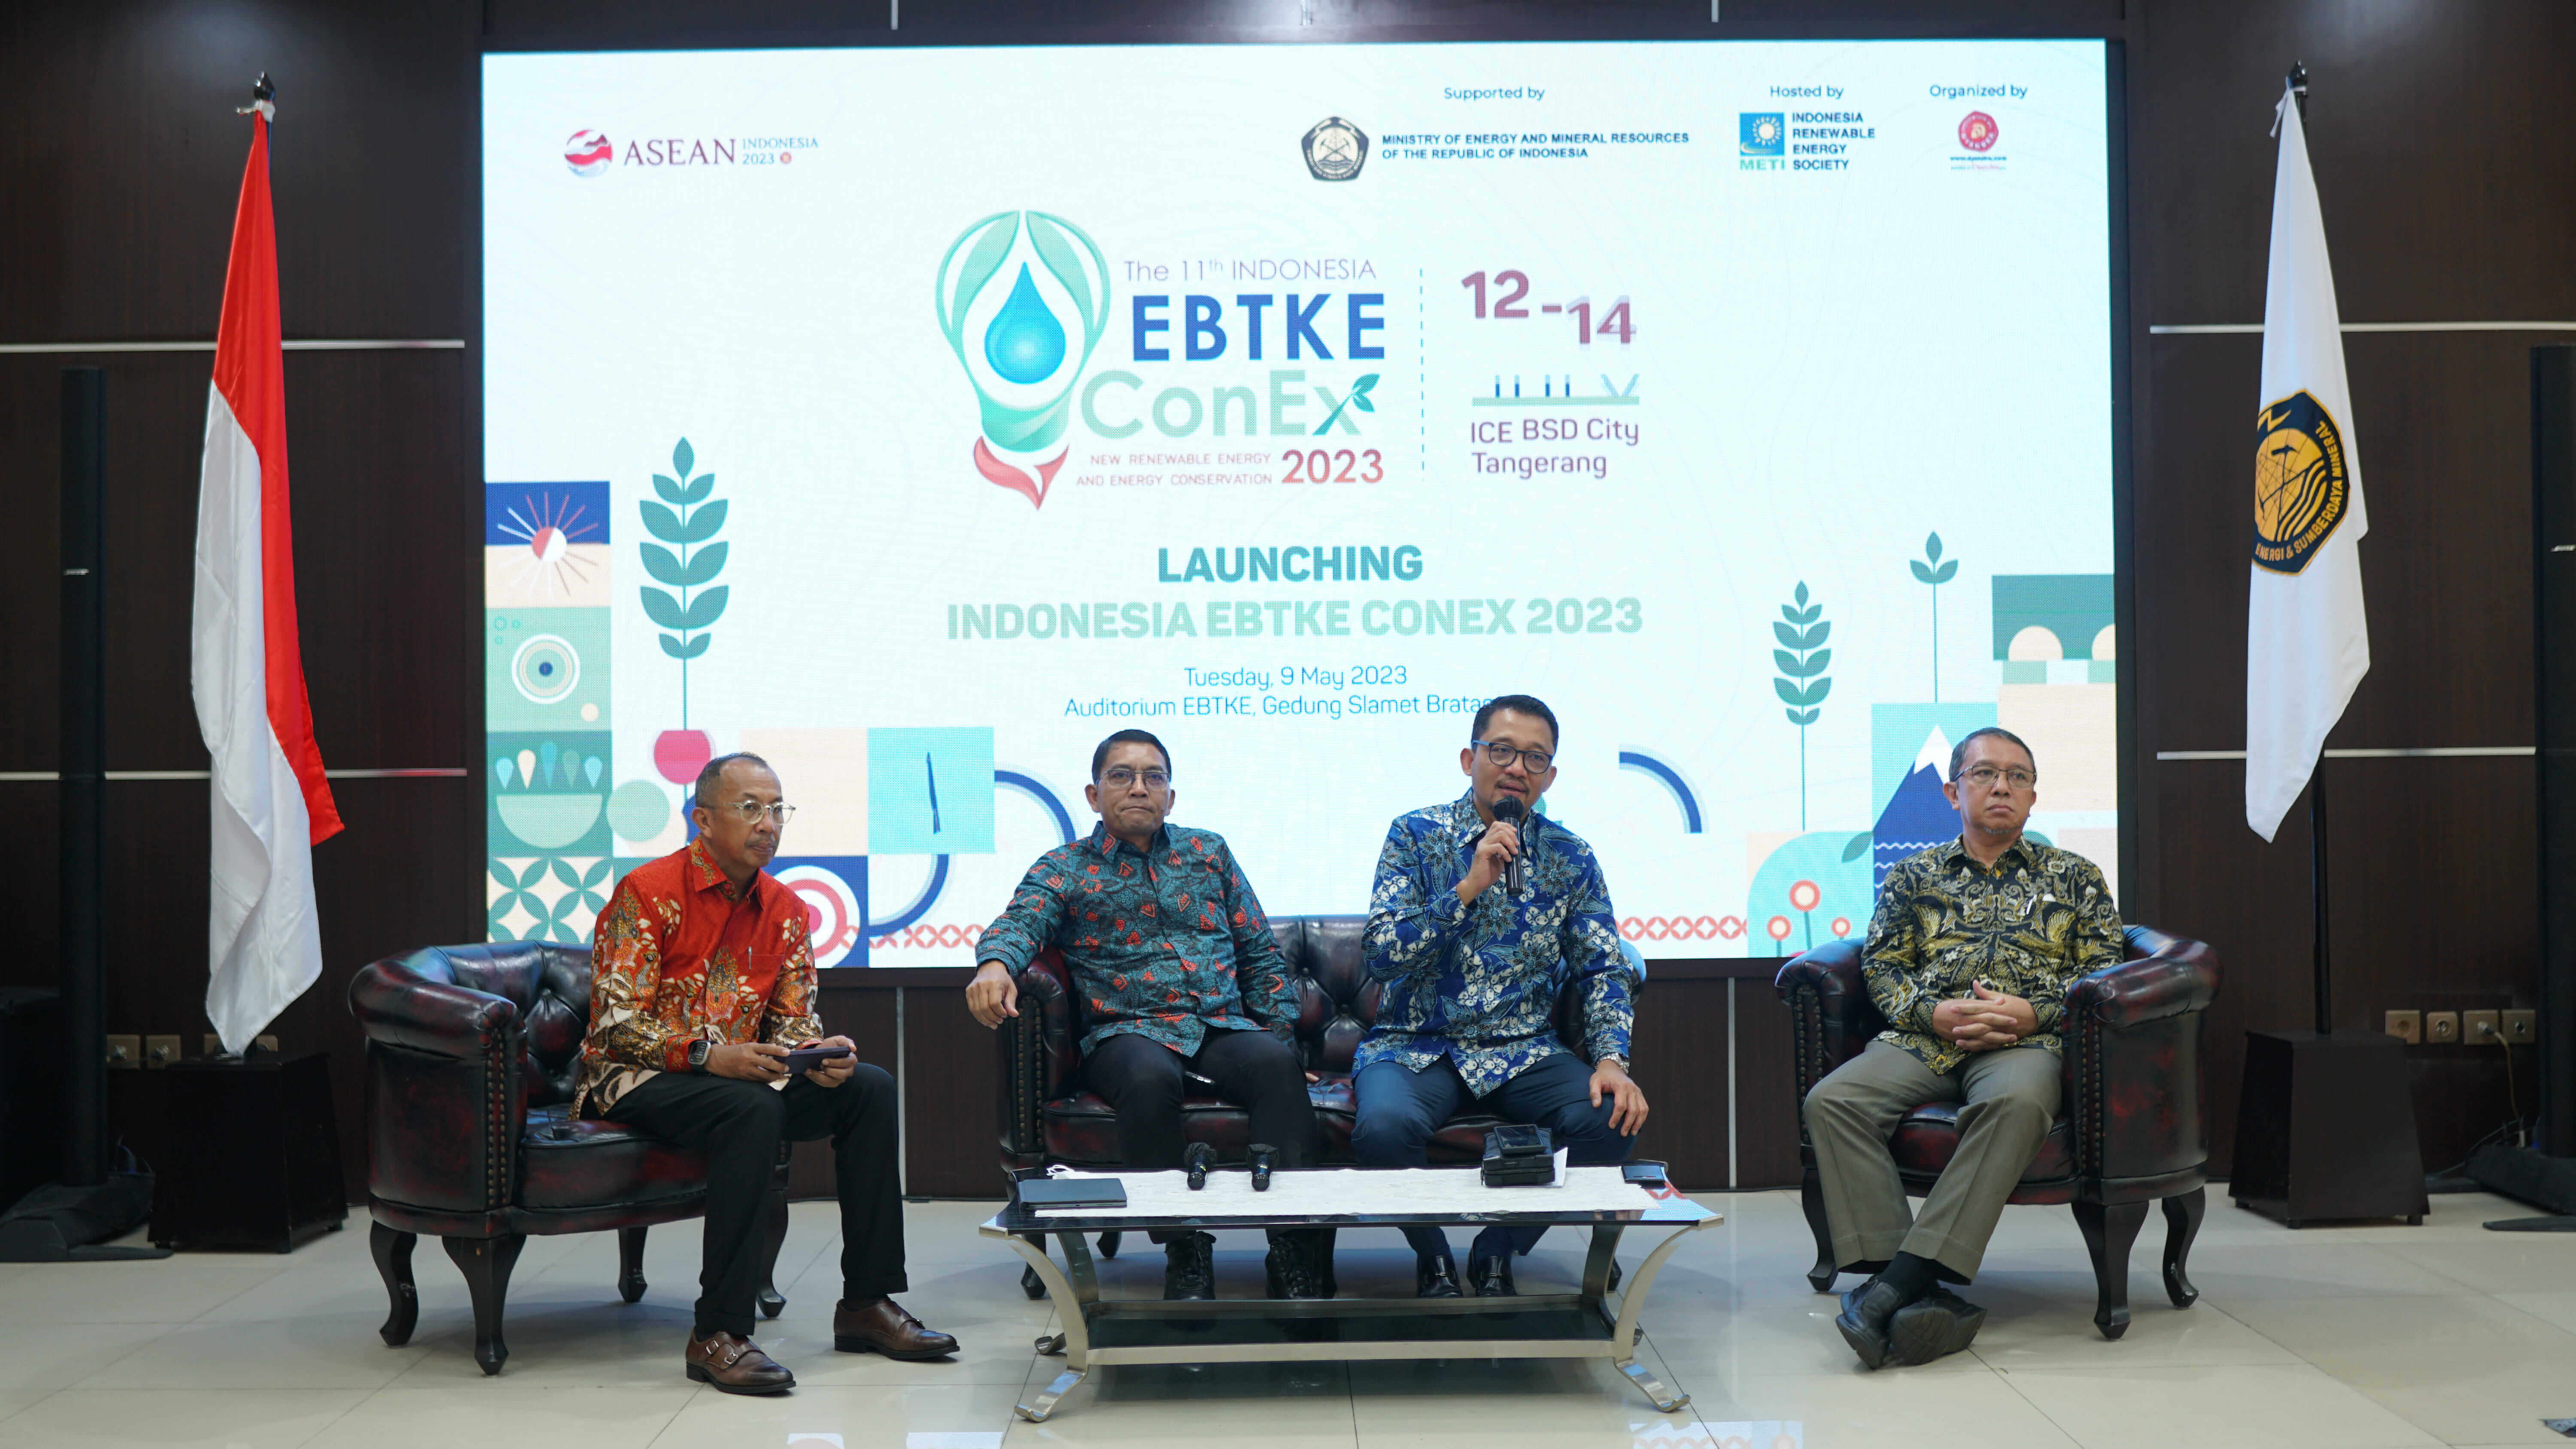 Indonesia EBTKE Conference and Exhibition 2023